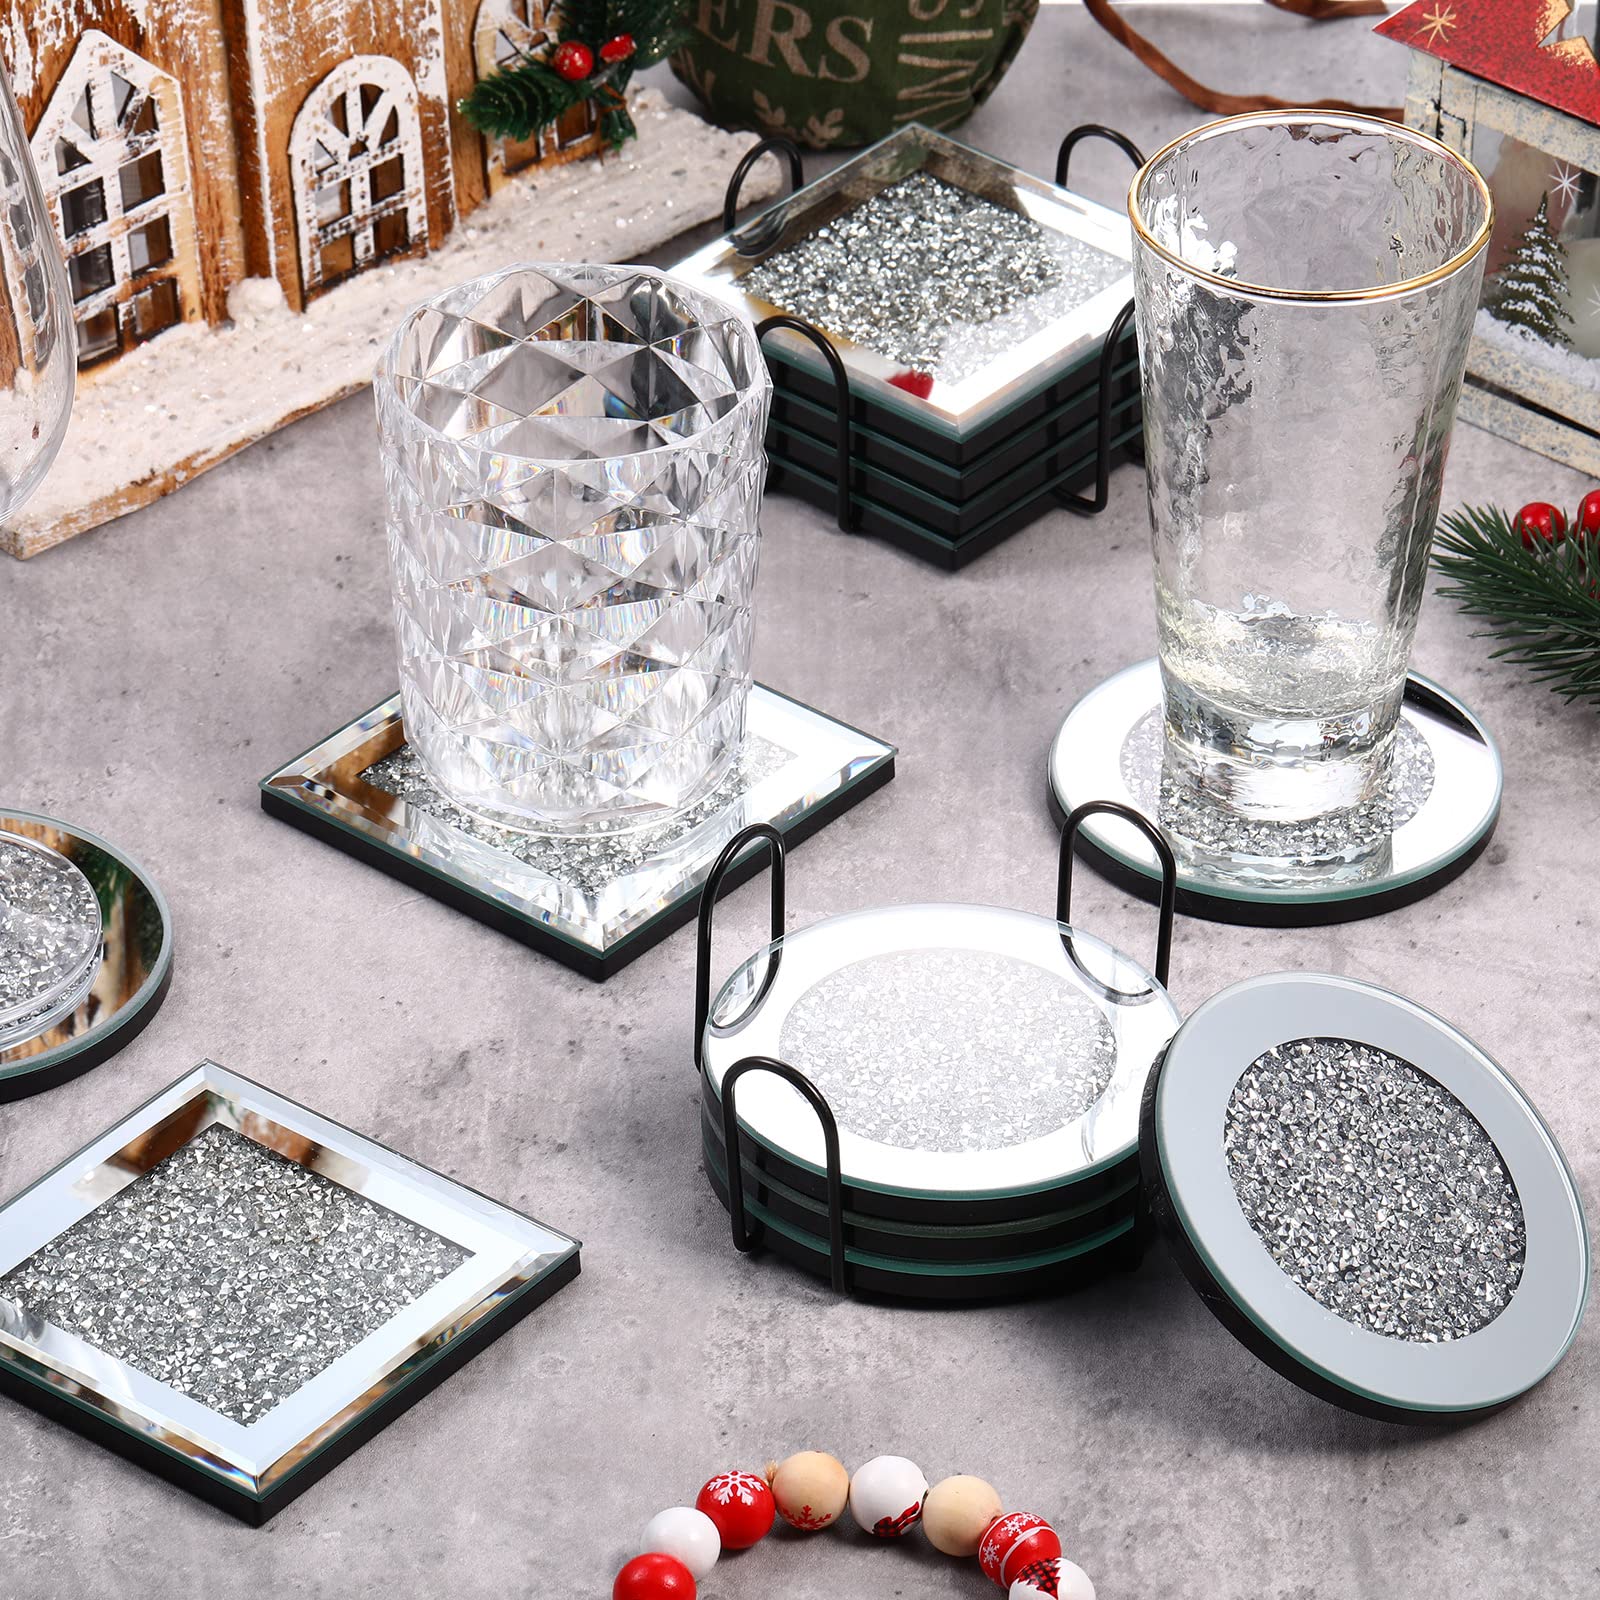 Mimorou 14 Pcs Glass Mirrored Coasters with Holder Set 12 Round Square Crushed Diamond Coaster 4 Inch Silver Crystal Cup Mat 2 Black Holder for Kitchen Dining Table Home Coffee